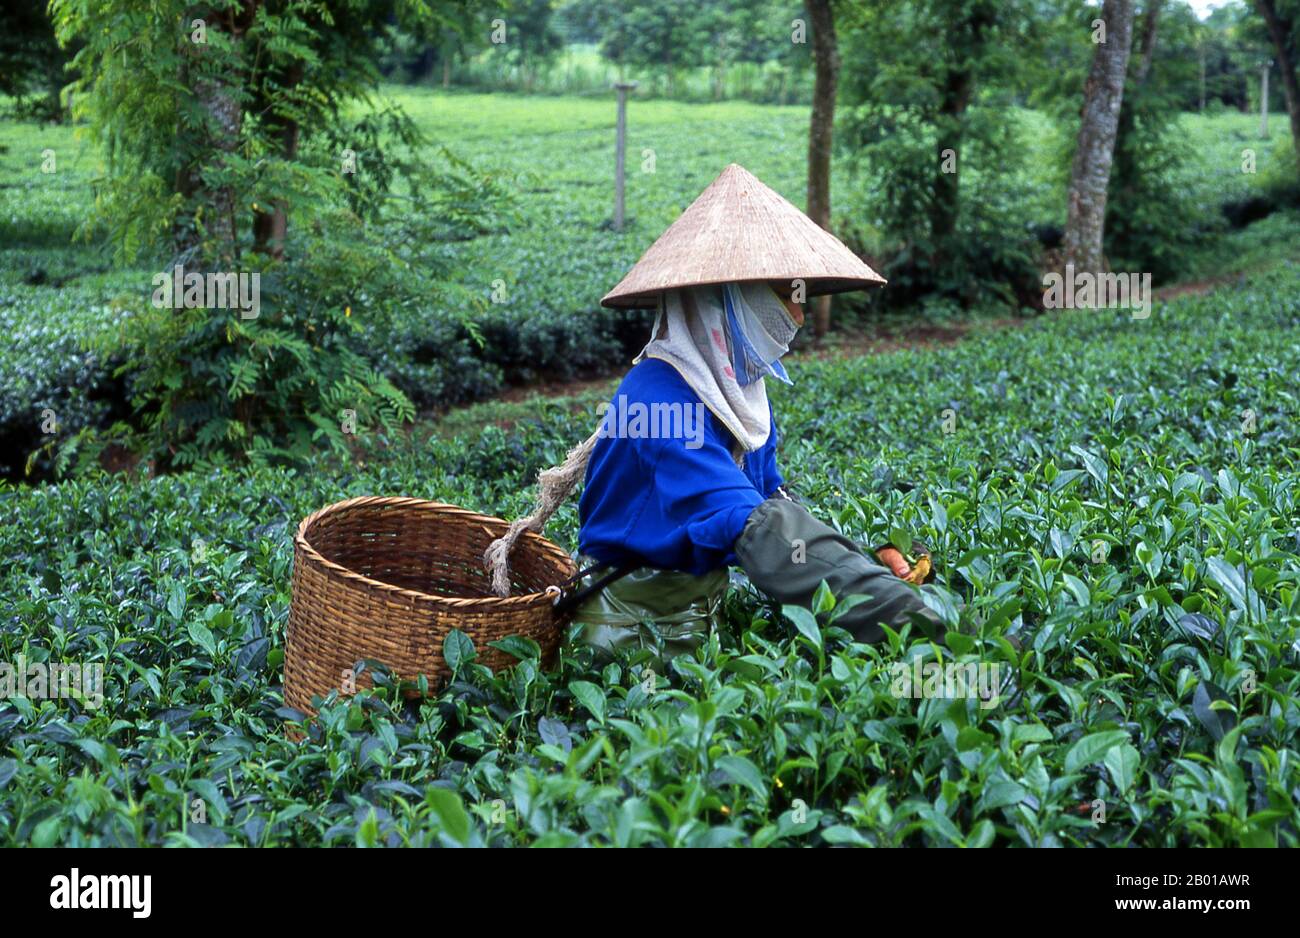 Vietnam: Tea picker at a tea plantation near Thanh Son, Phu Tho Province, northwest Vietnam.  According to oral tradition, tea has been grown in China for more than four millennia. The earliest written accounts of tea making, however, date from around 350 CE, when it first became a drink at the imperial court.    Around 800 CE tea seeds were taken to Japan, where regular cultivation was soon established. Just over five centuries later, in 1517, tea was first shipped to Europe by the Portuguese soon after they began their trade with China. Stock Photo